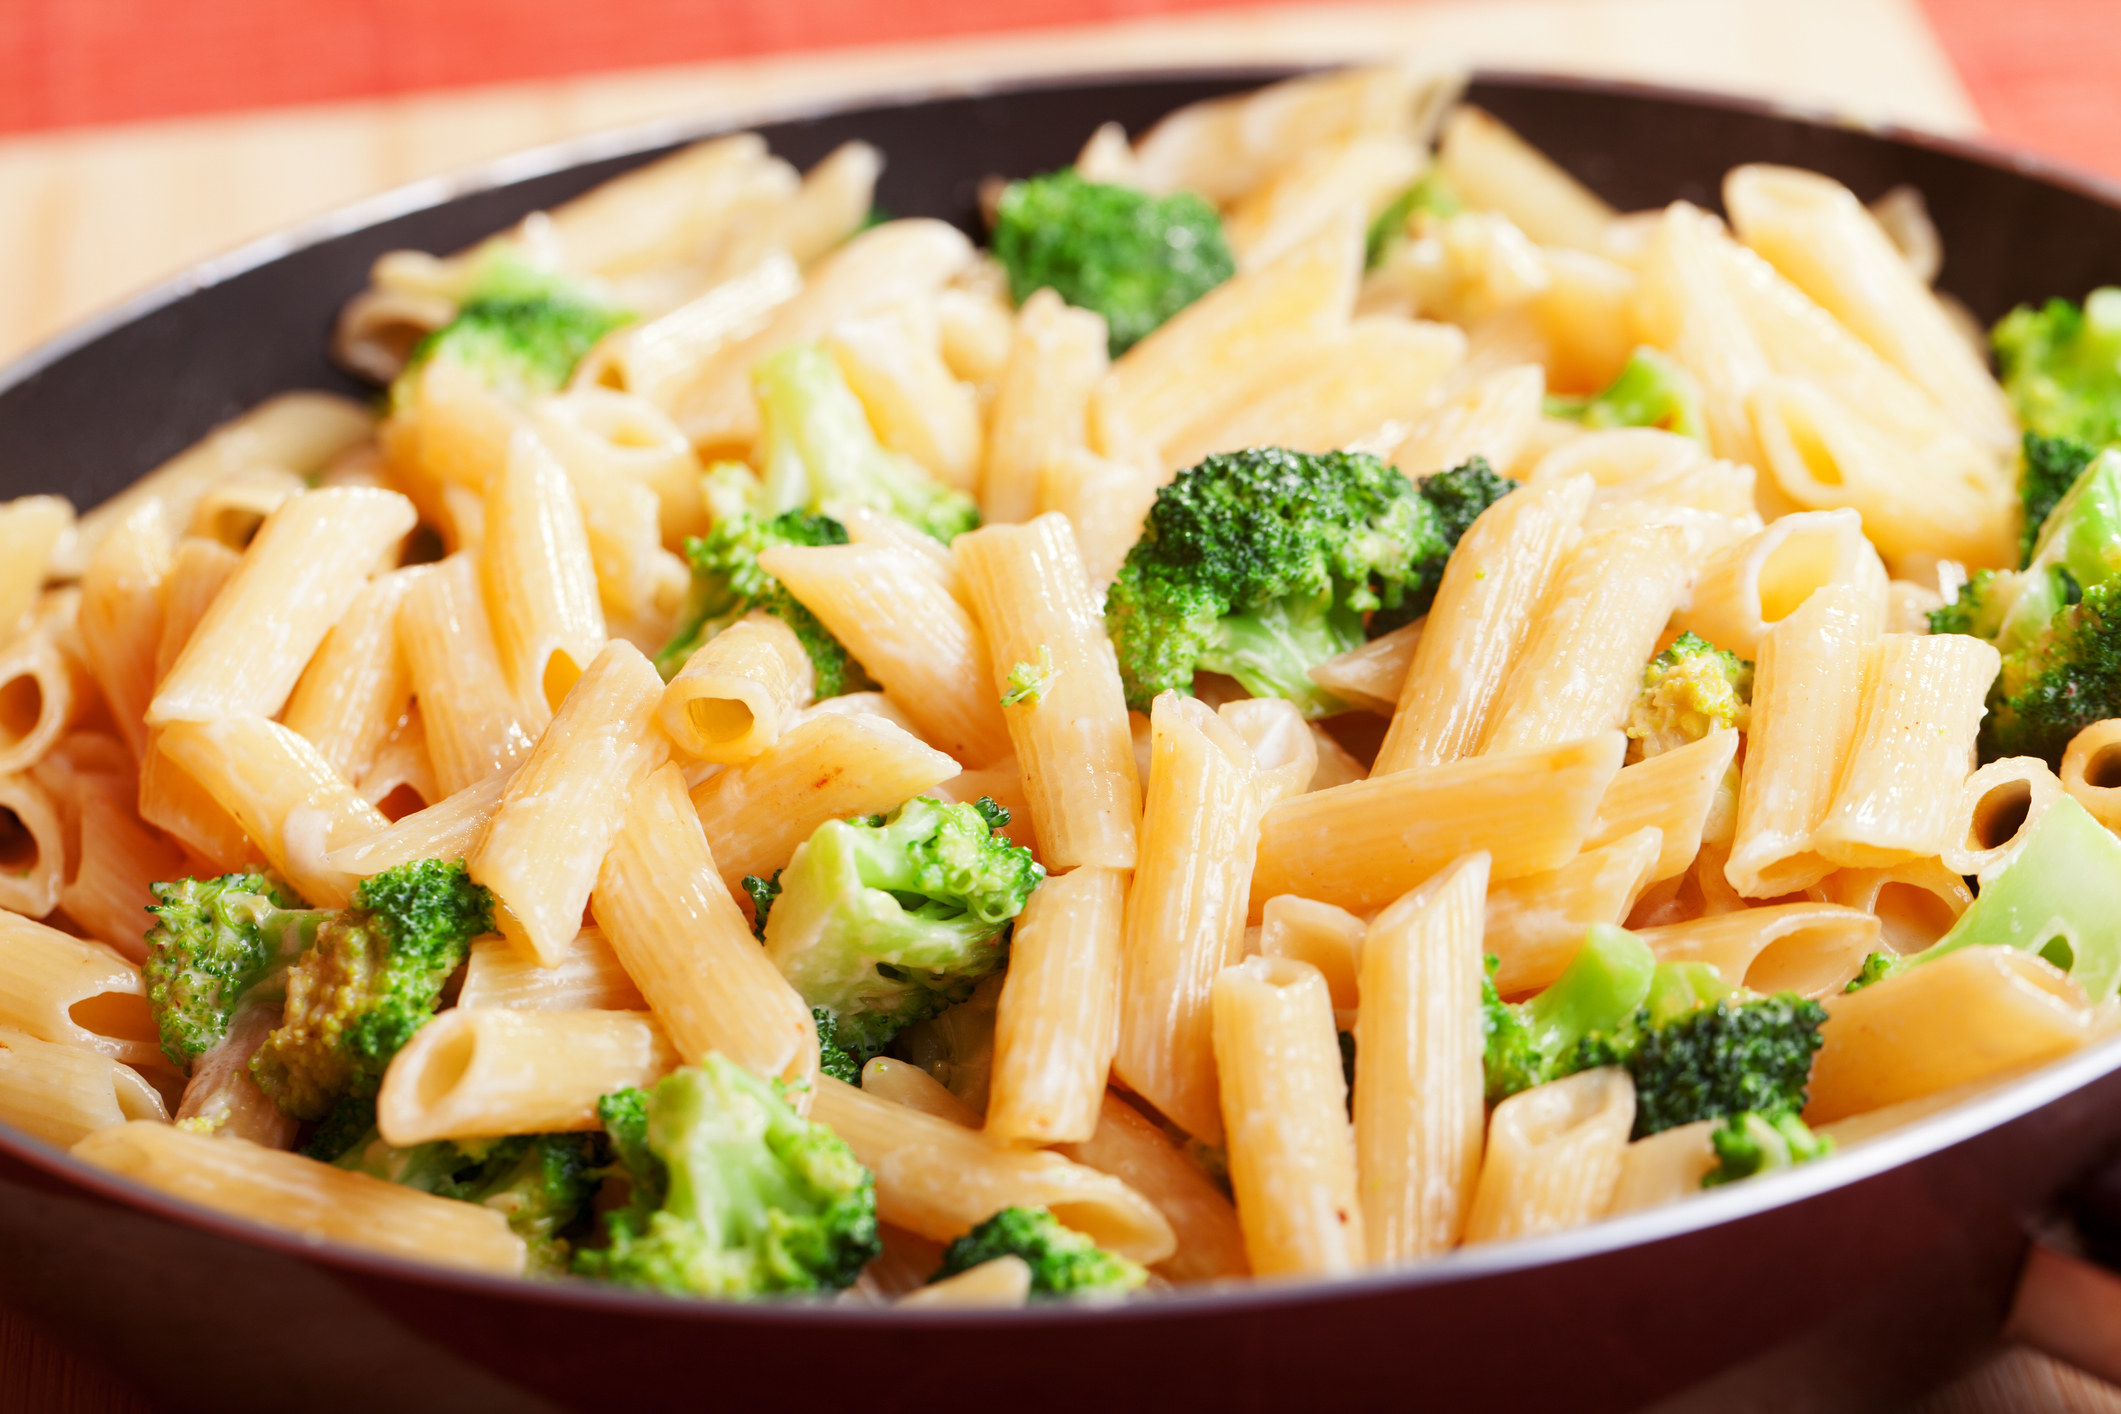 A skillet of penne and broccoli.